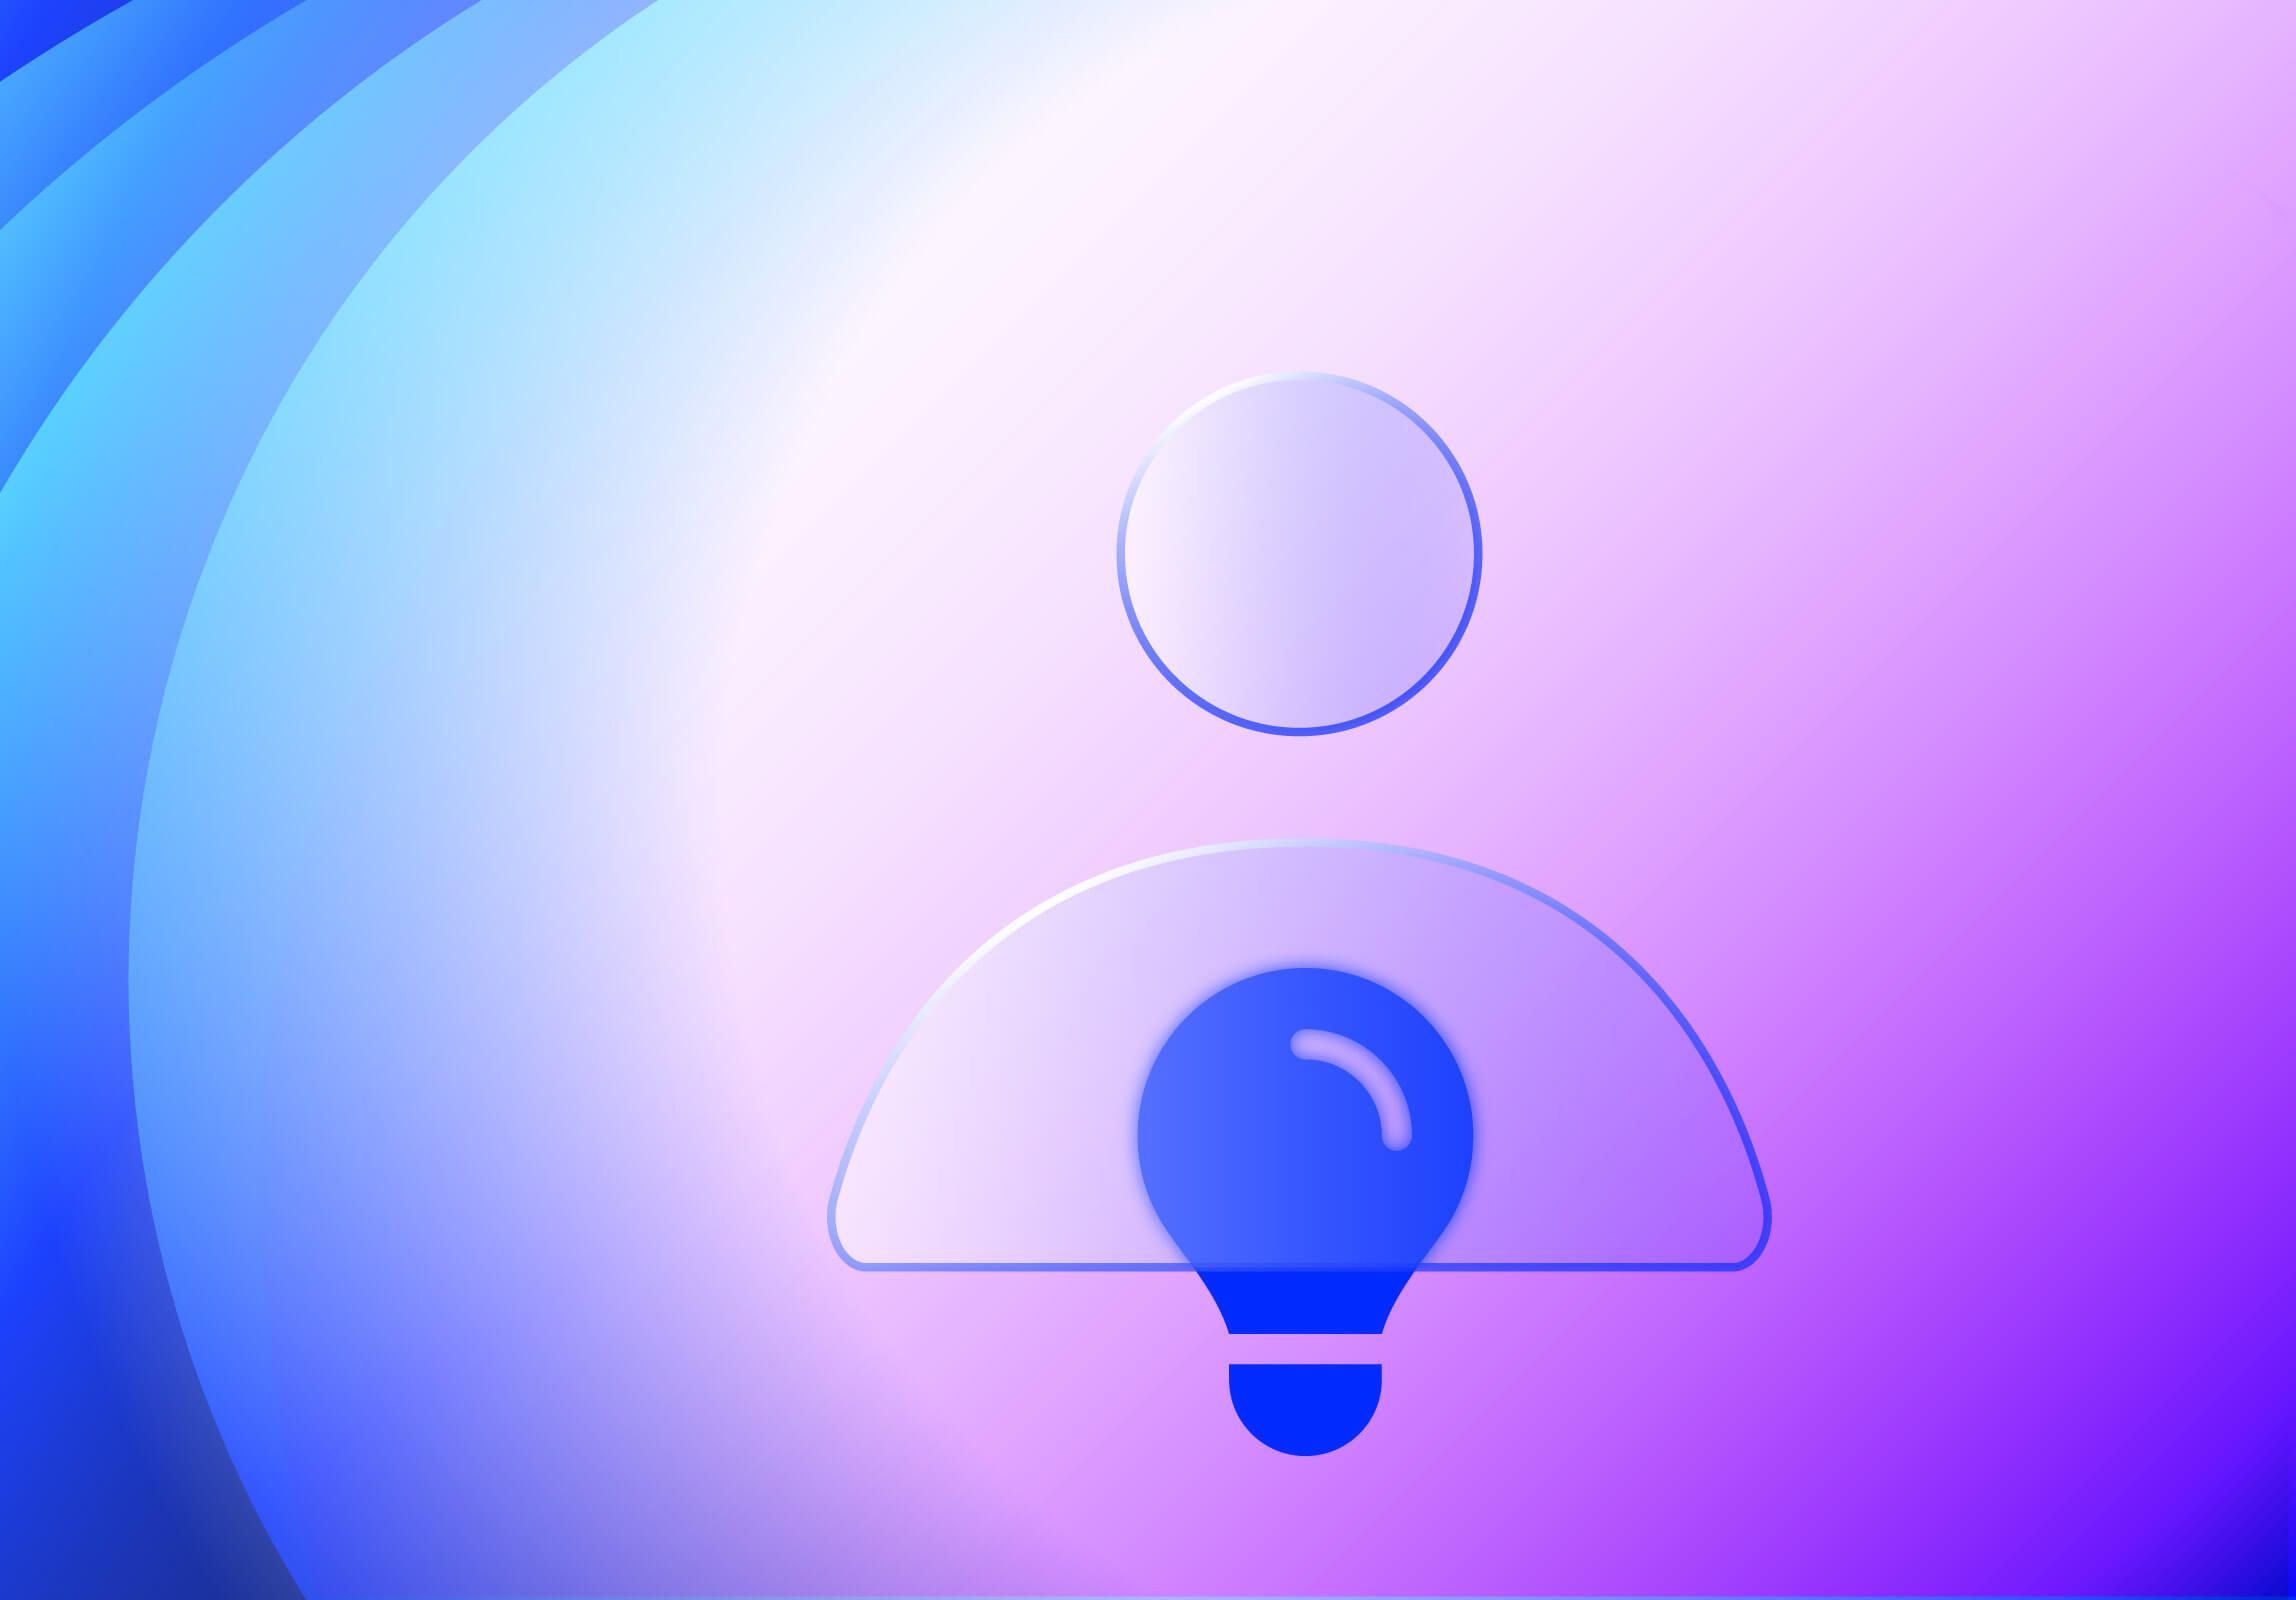 A person icon with a lightbulb in the middle surrounded by Datacom circles